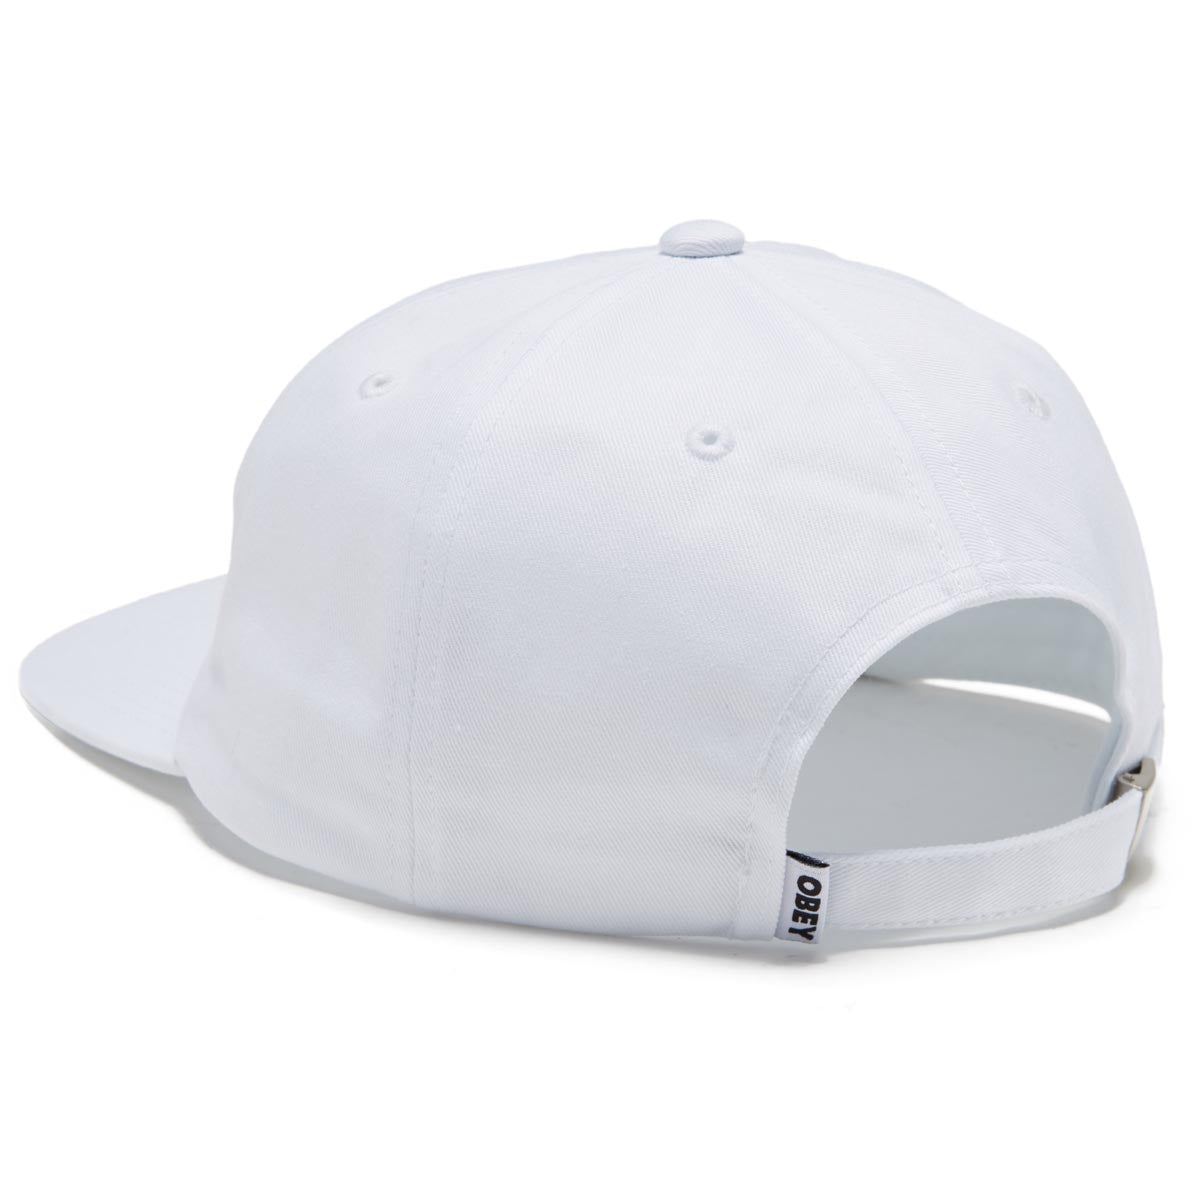 Obey Icon Patch Panel Strapback Hat - White image 2